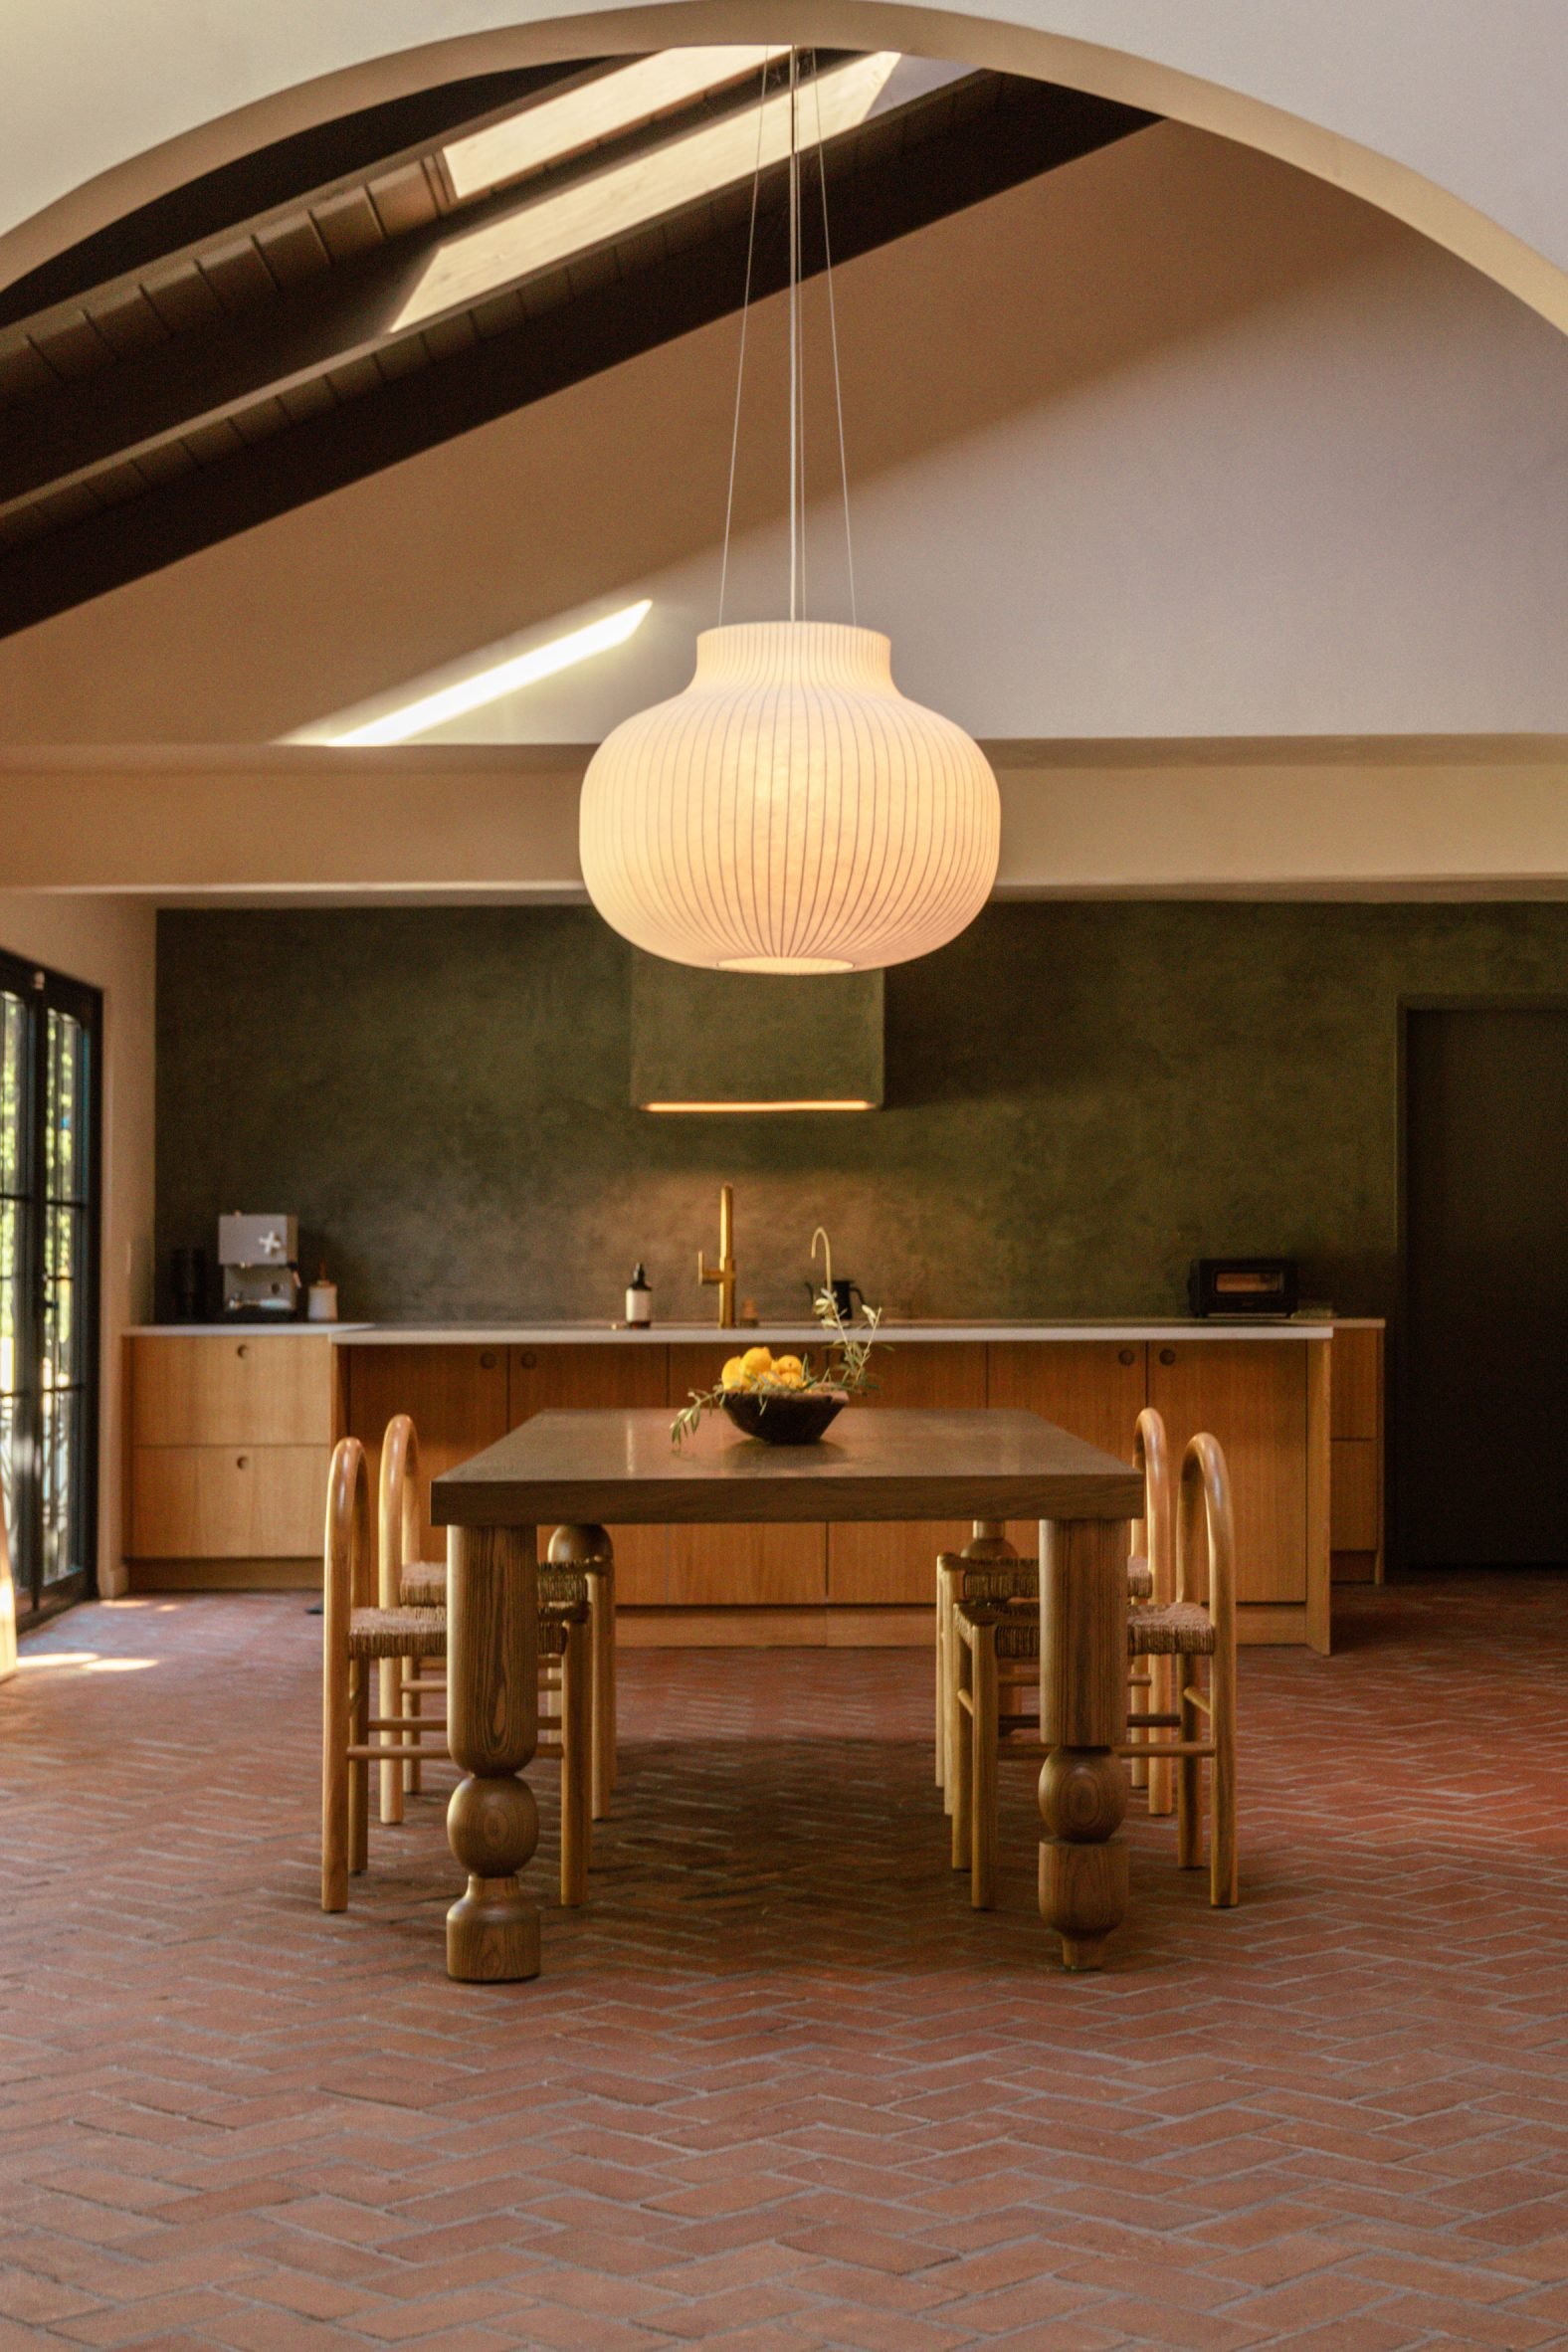 Kitchen and dining room with mono-pitched ceiling and brick floor